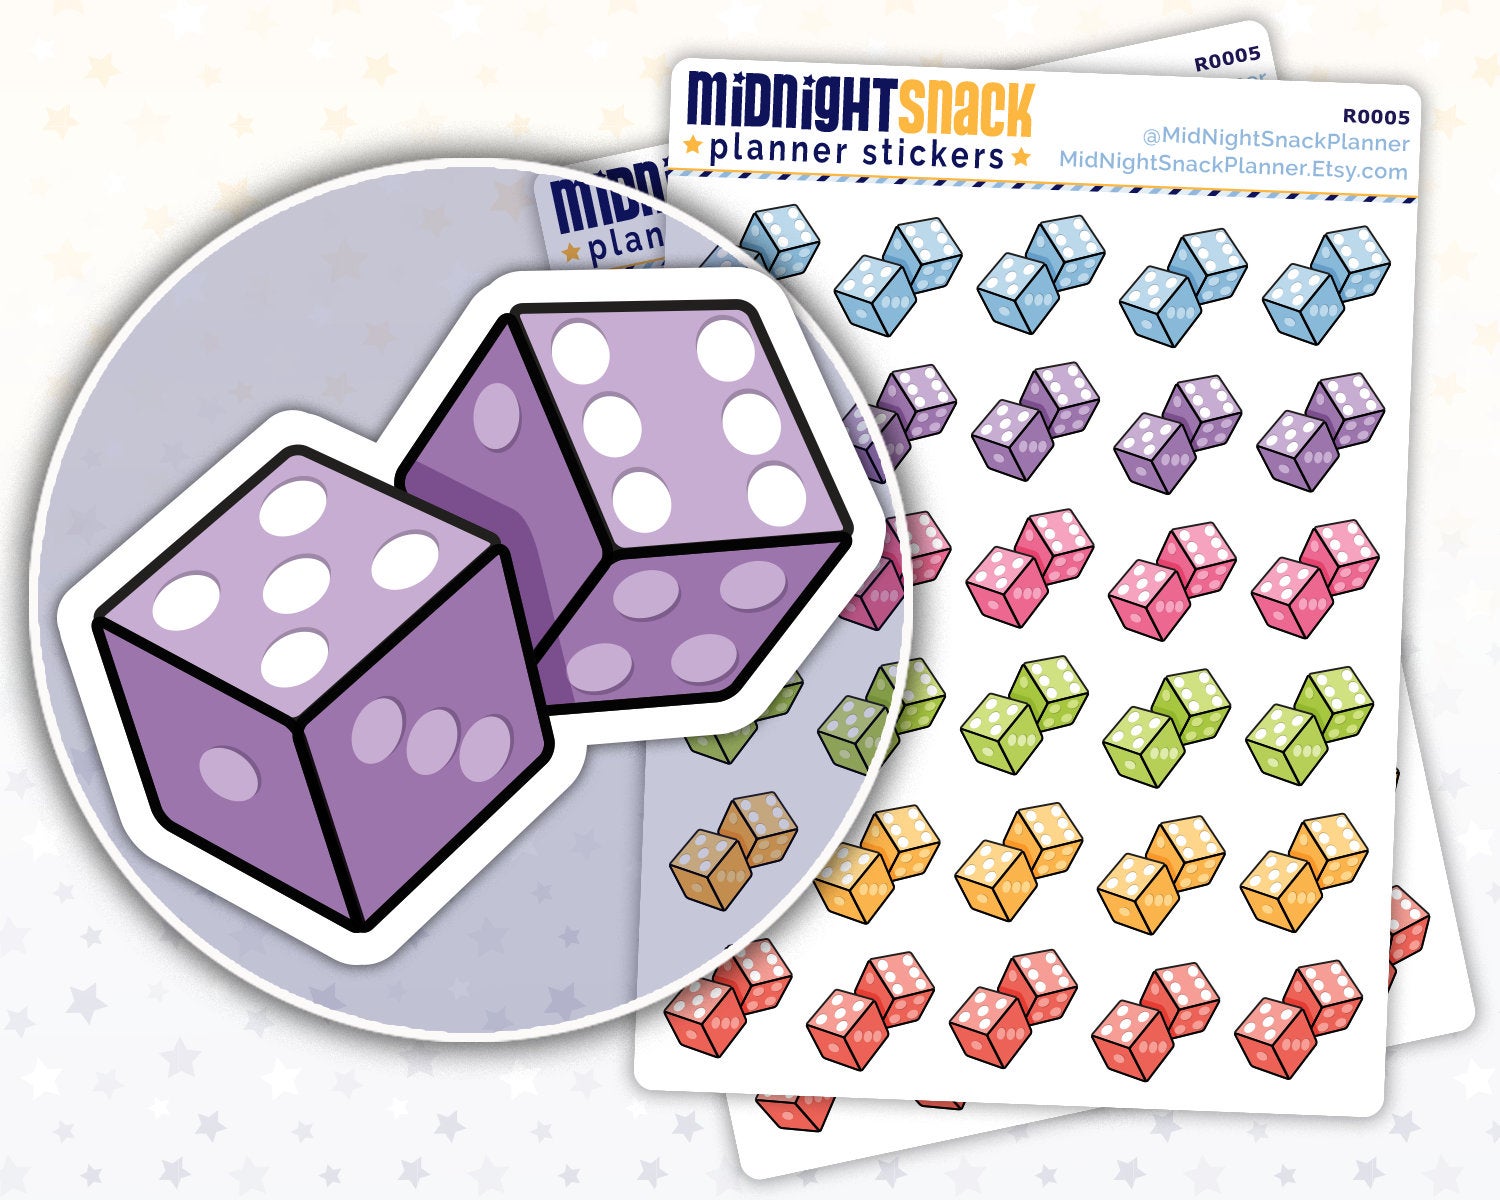 Dice Games Planner Stickers from Midnight Snack Planner